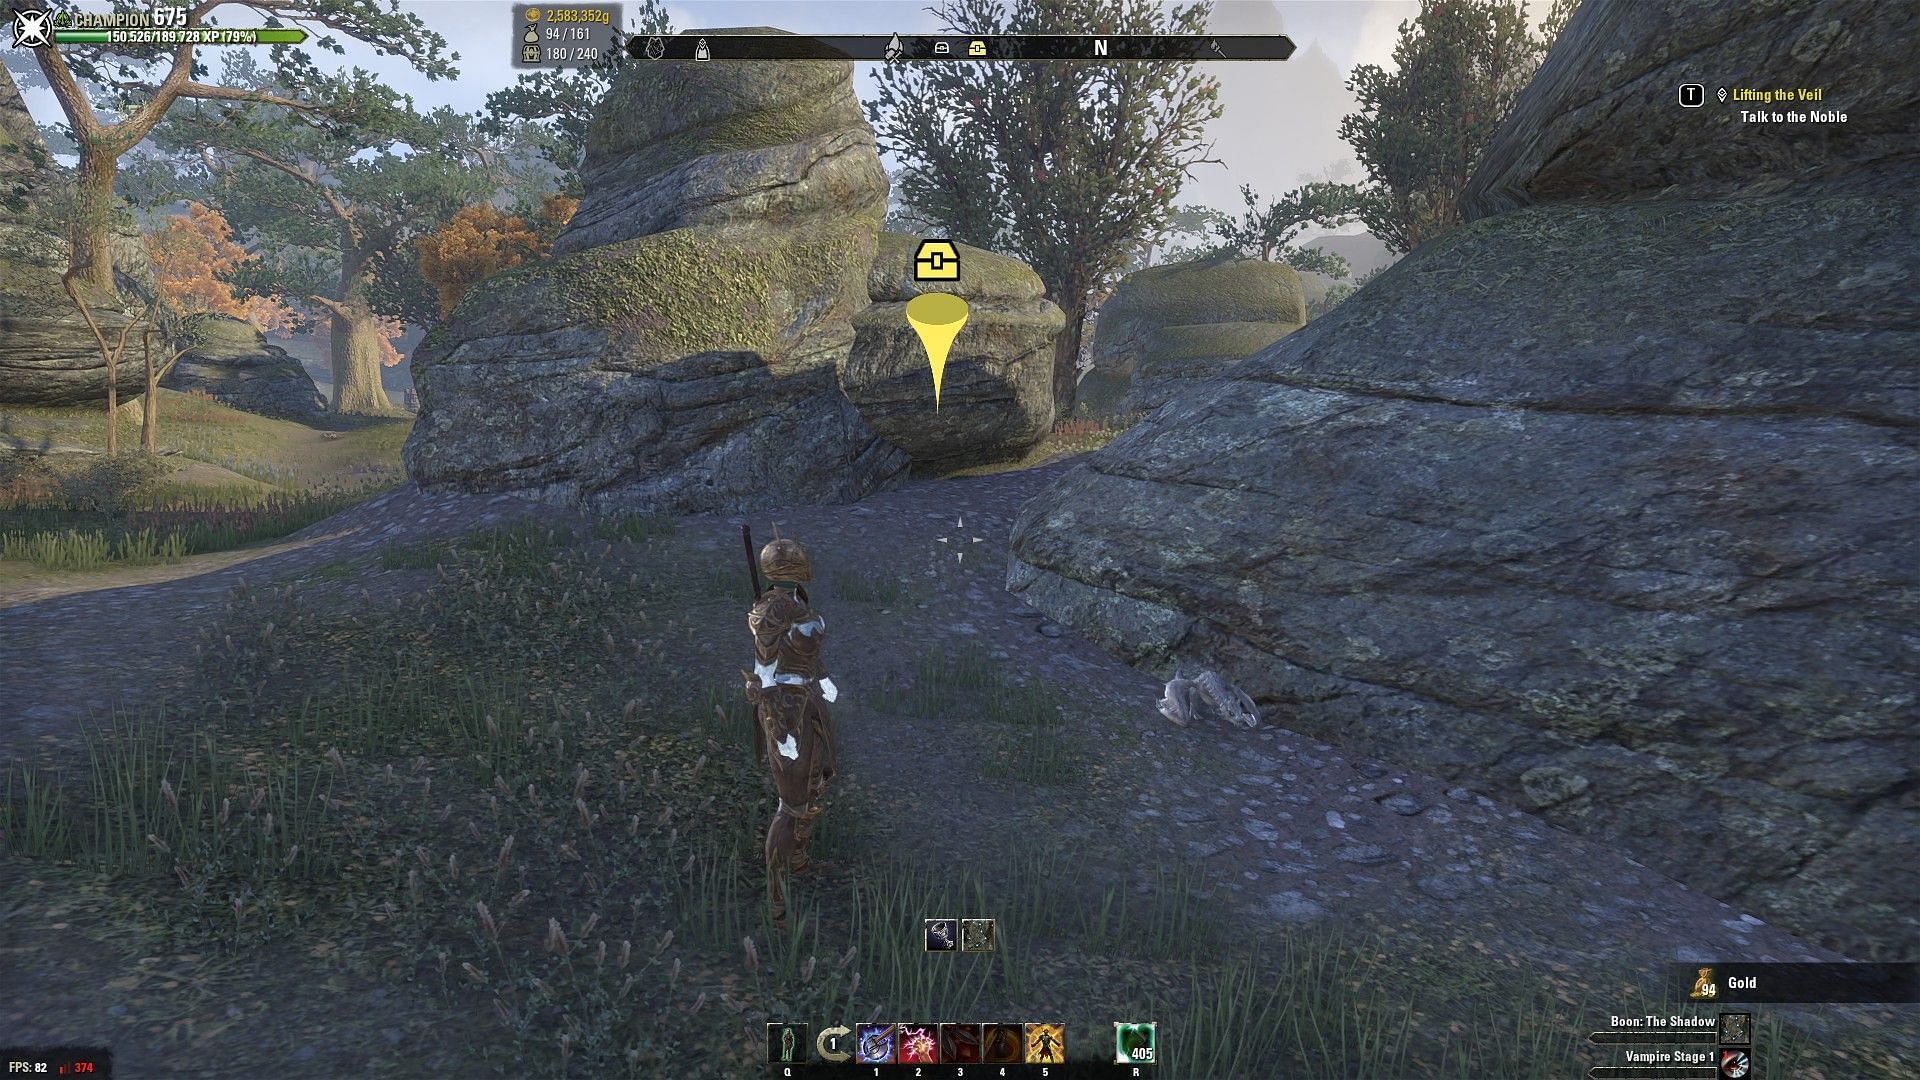 Lost Treasure on the compass and 3D icon in-game (Image via Elder Scrolls Online)